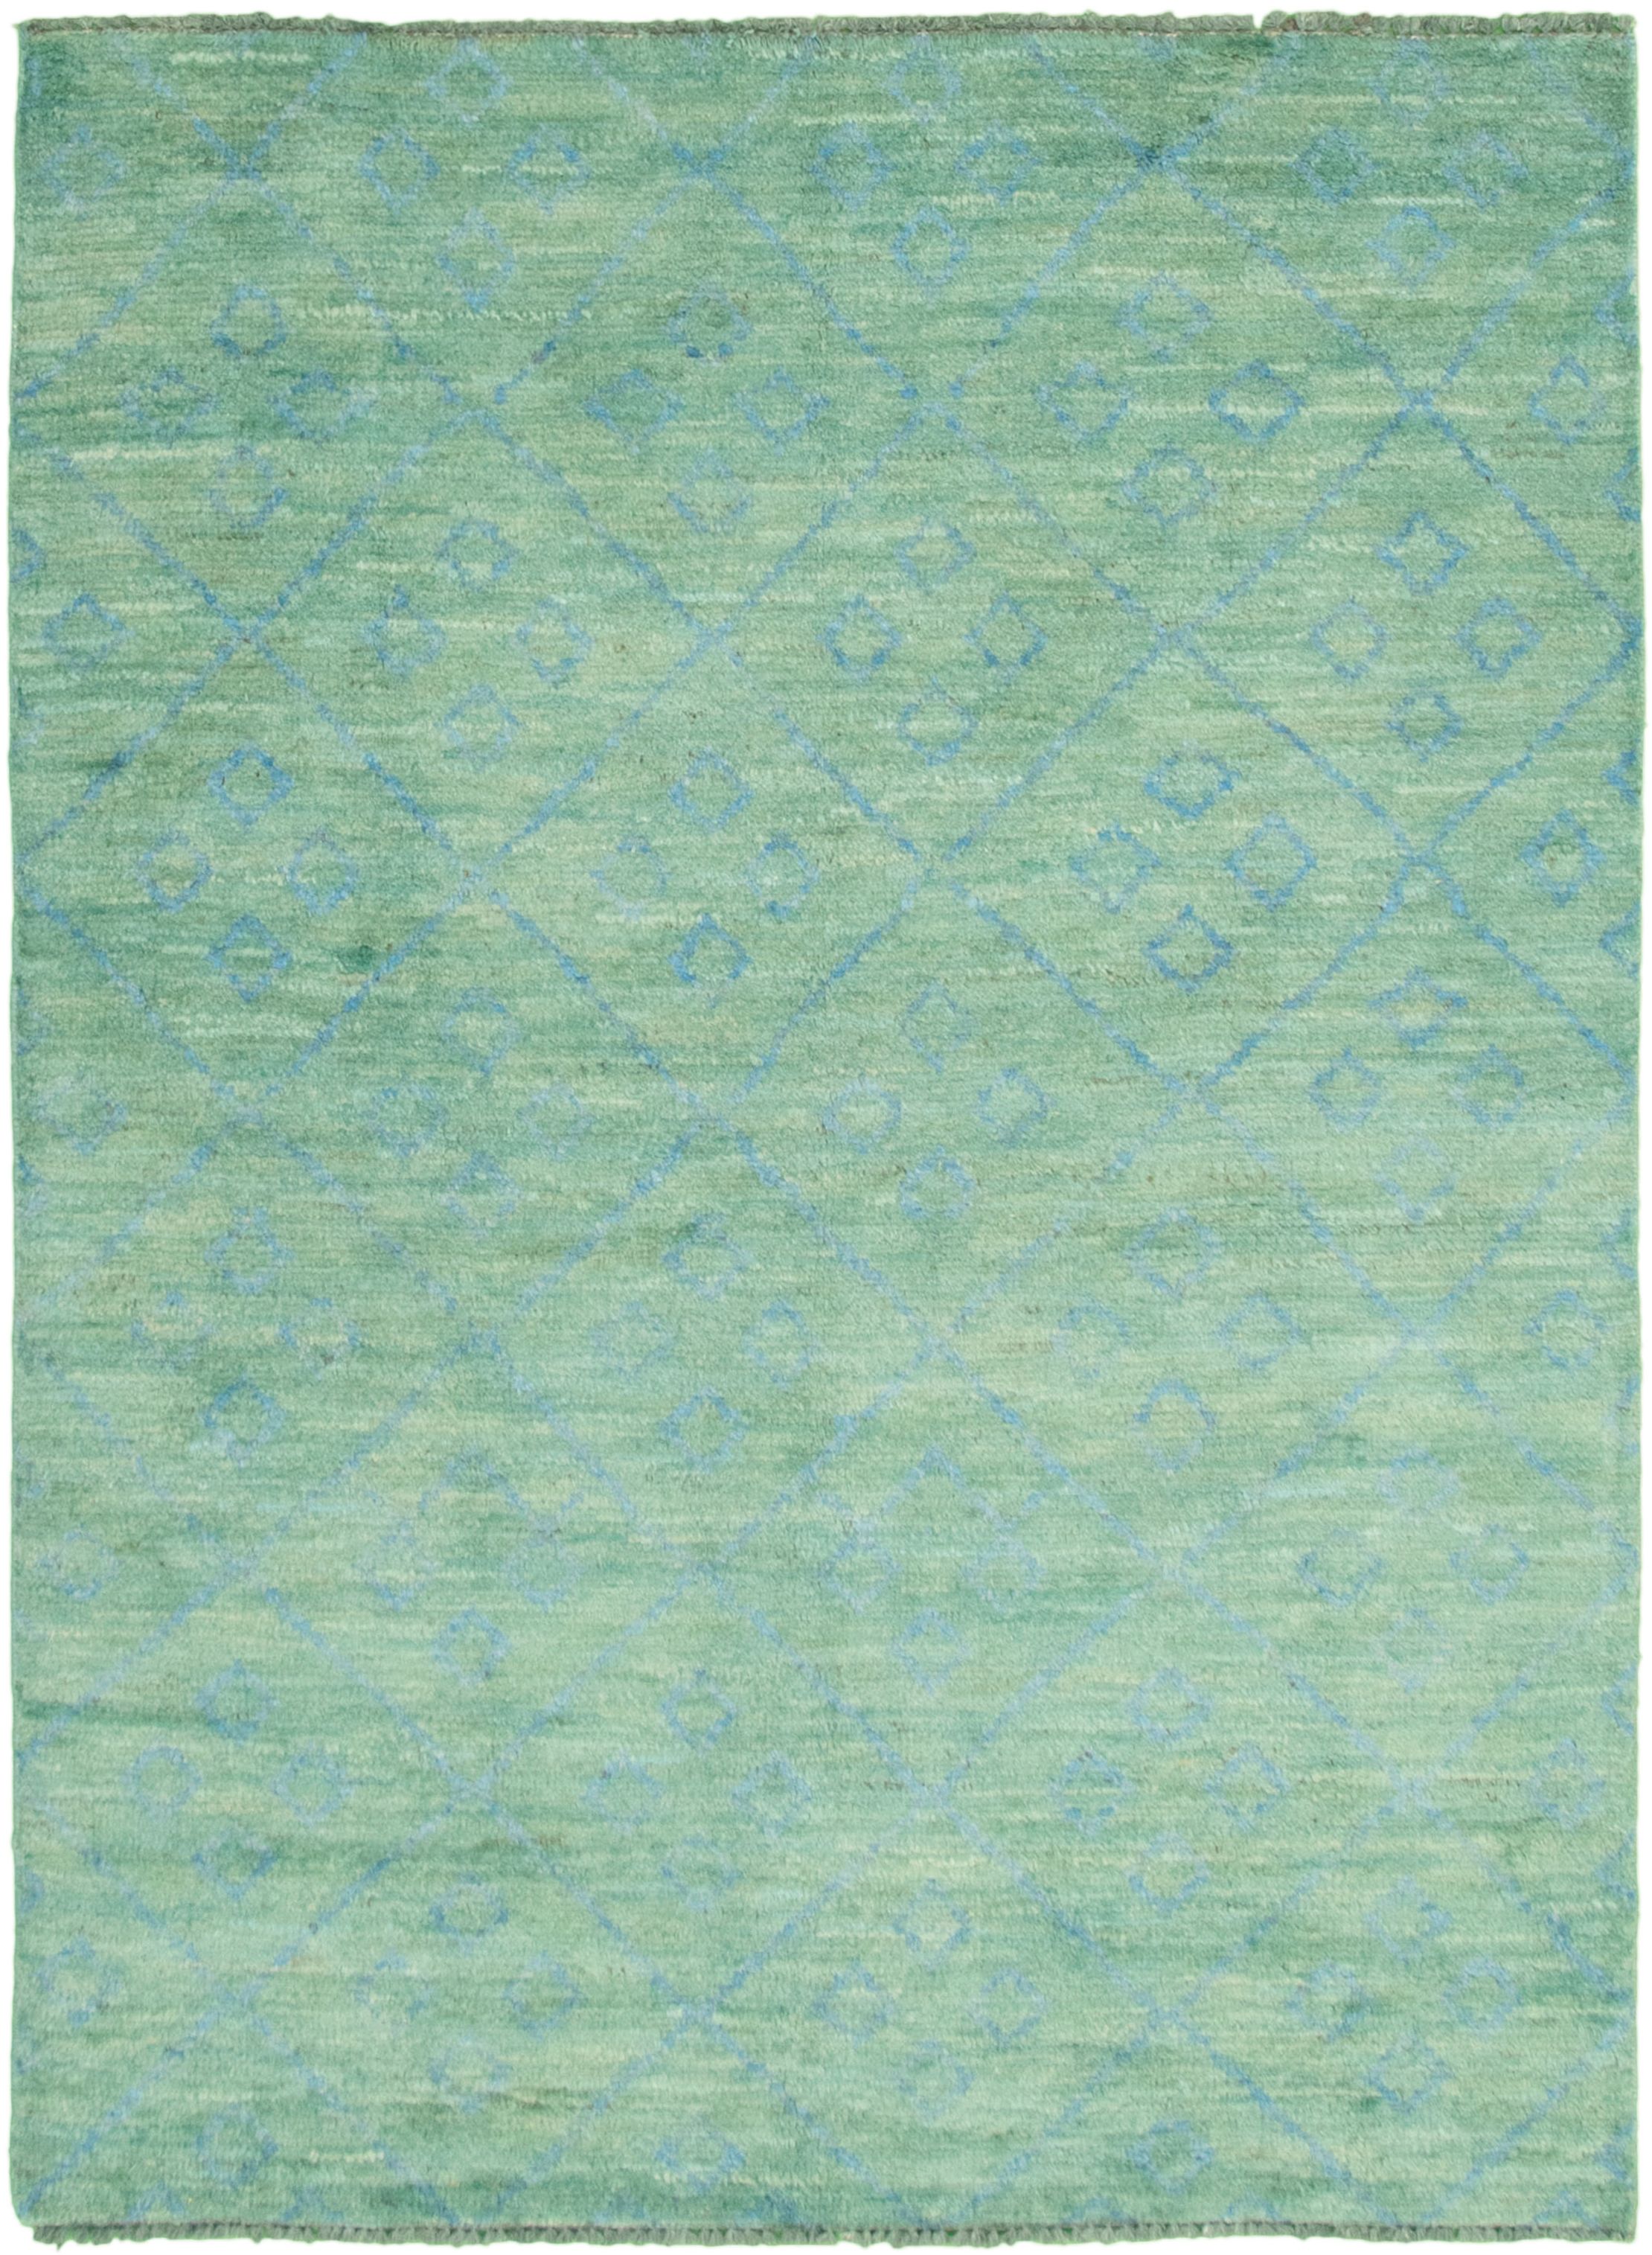 Hand-knotted Marrakech Teal  Rug 5'2" x 6'11" Size: 5'2" x 6'11"  